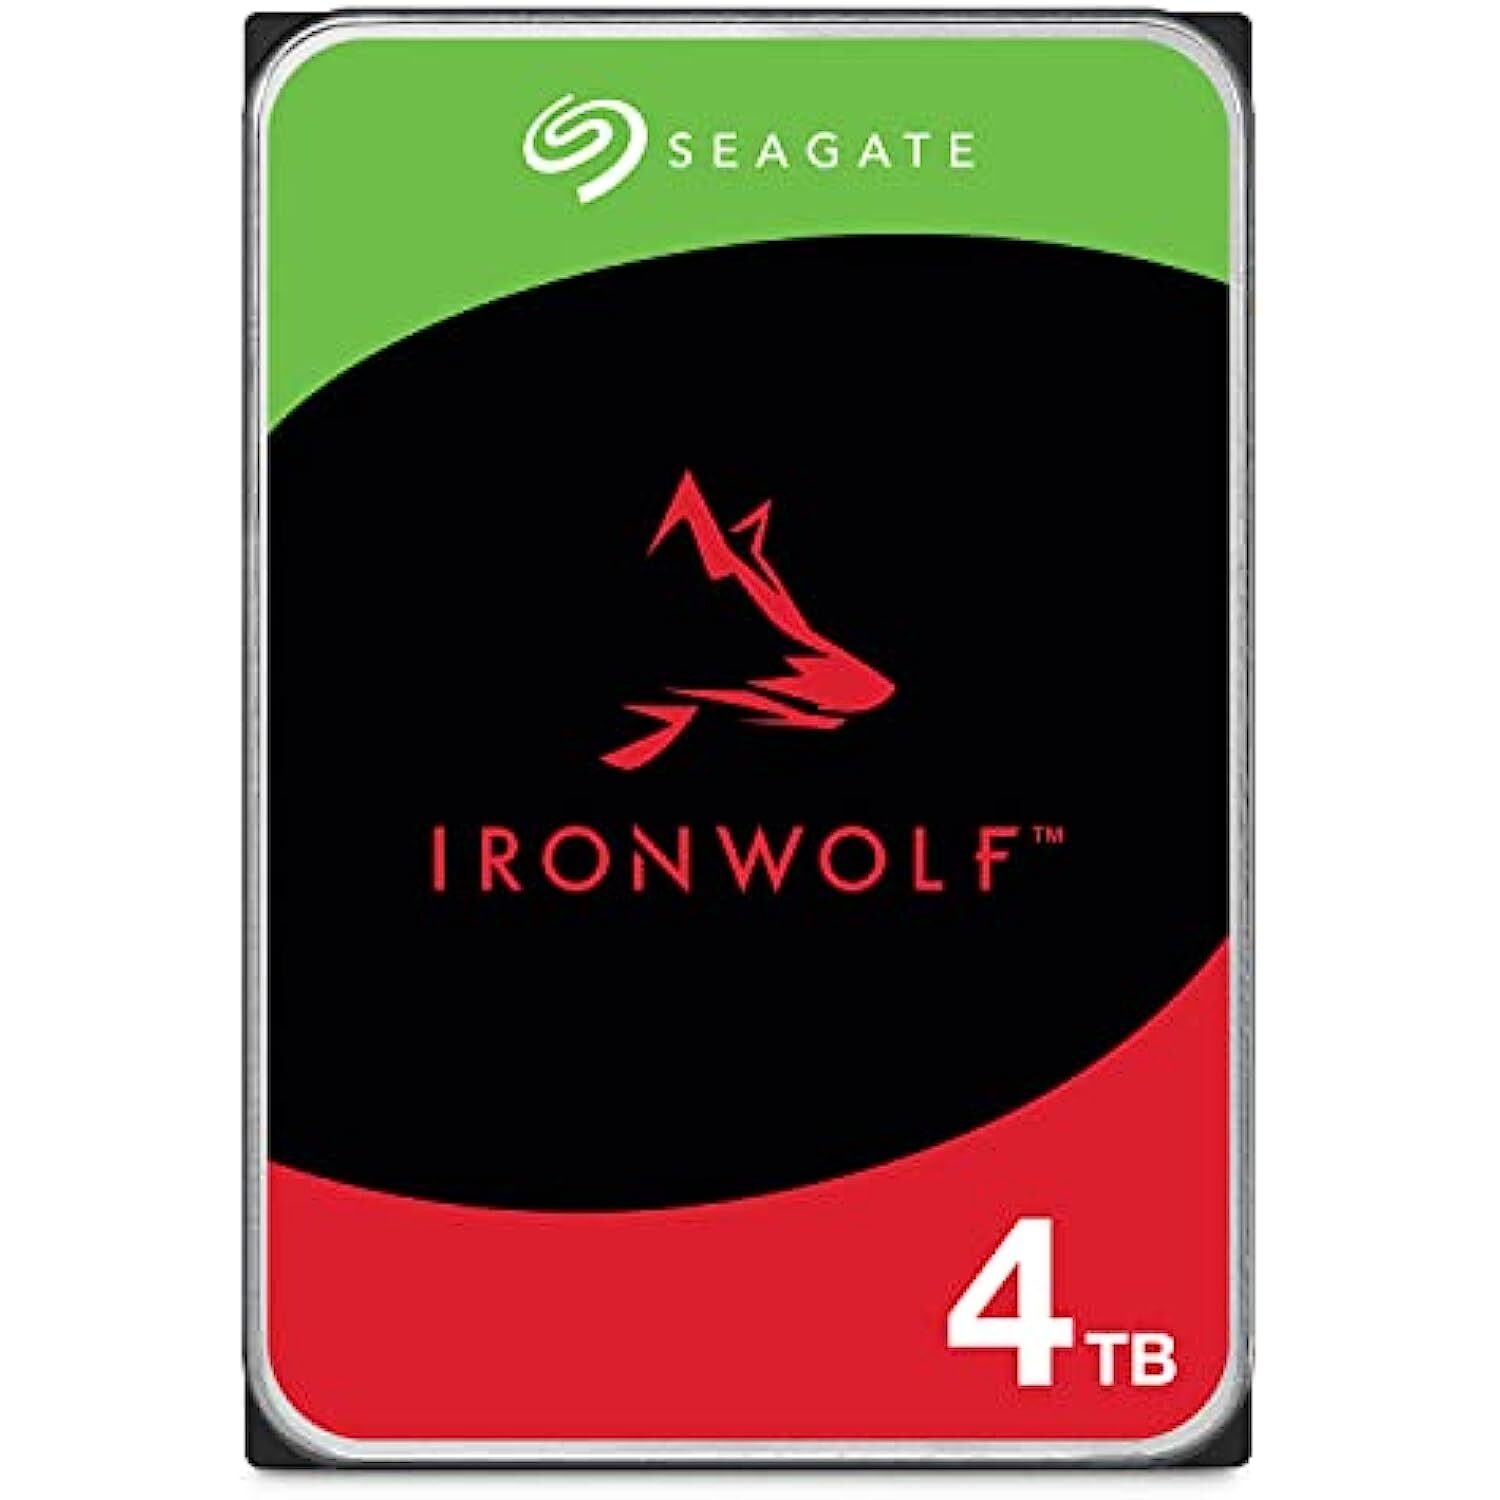 Seagate IronWolf 3.5 Inches SATA 6 Gb/s 5900 RPM 64 MB Cache 4 TB NAS Internal Hard Drive HDD for RAID Network Attached Storage (ST4000VN008)